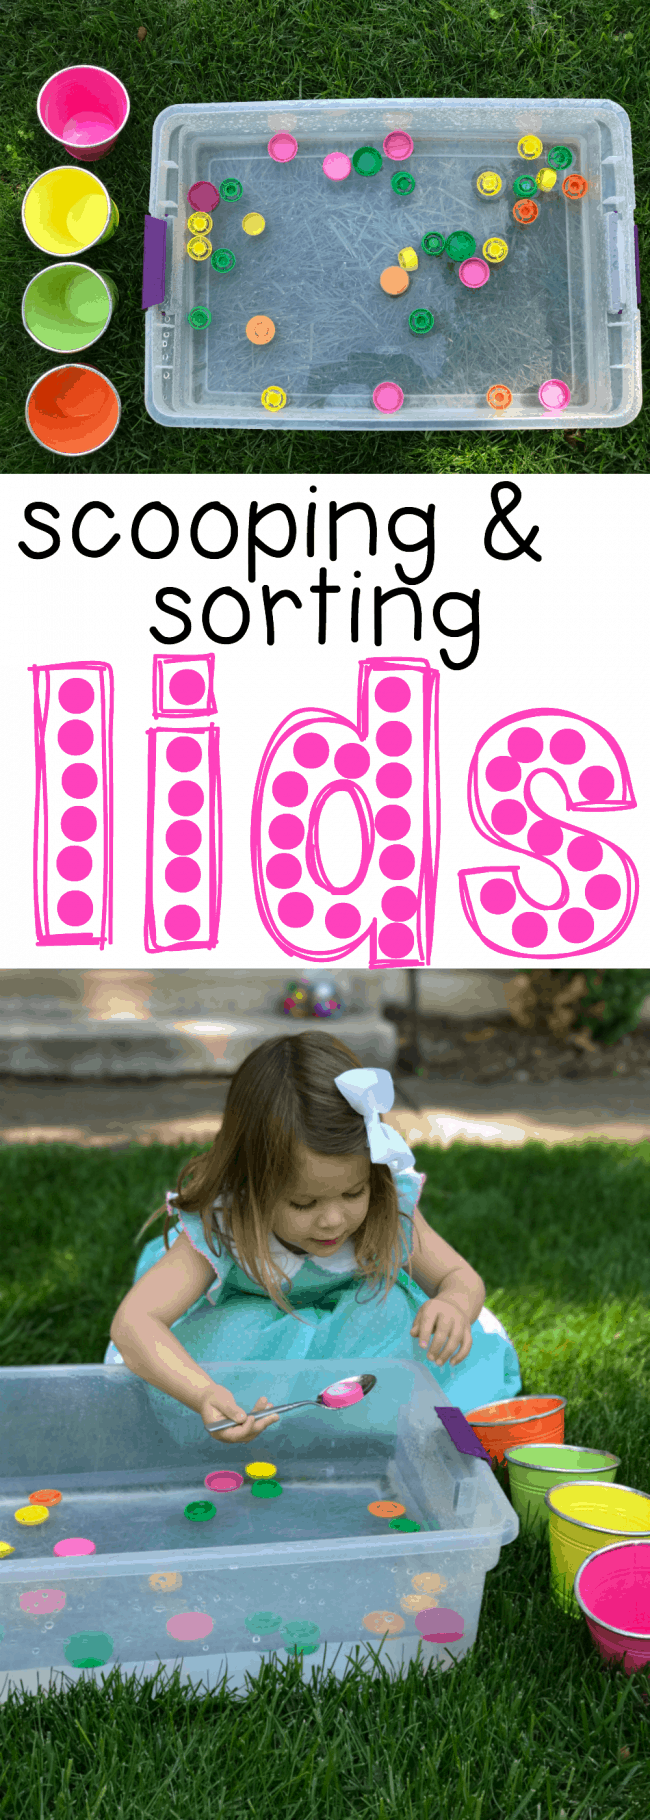 Scooping & Sorting Lids for Toddlers